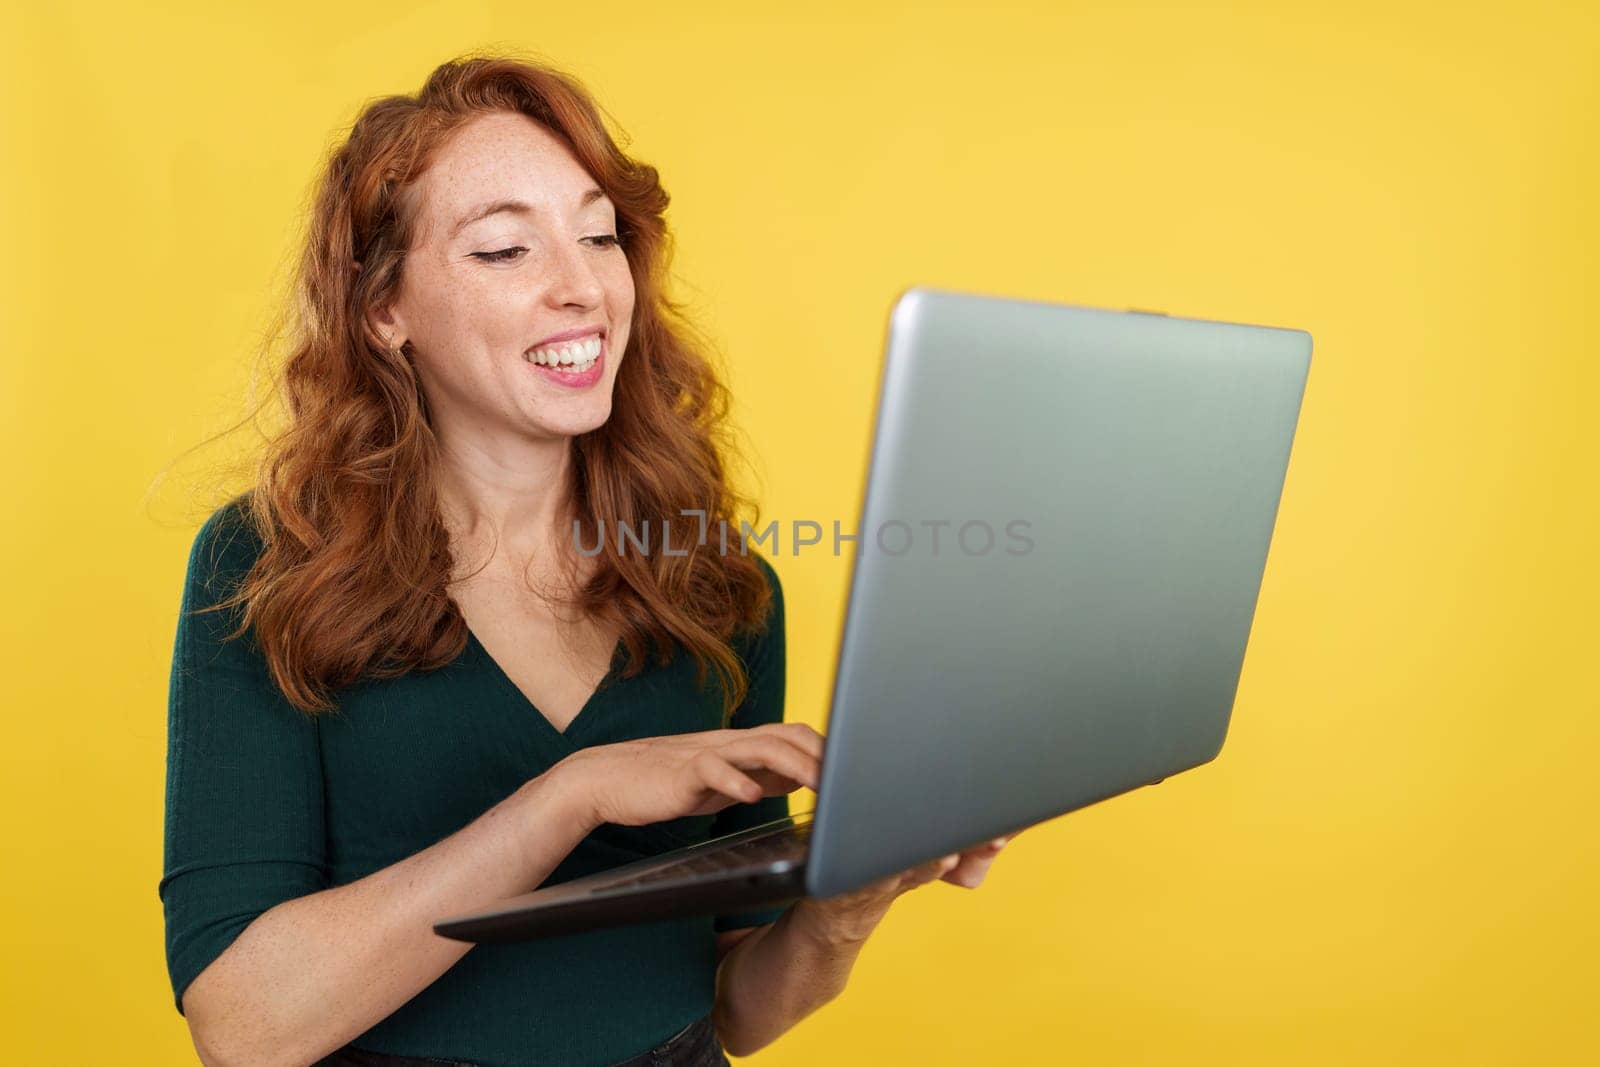 Happy redheaded woman using a laptop while smiling in studio with yellow background